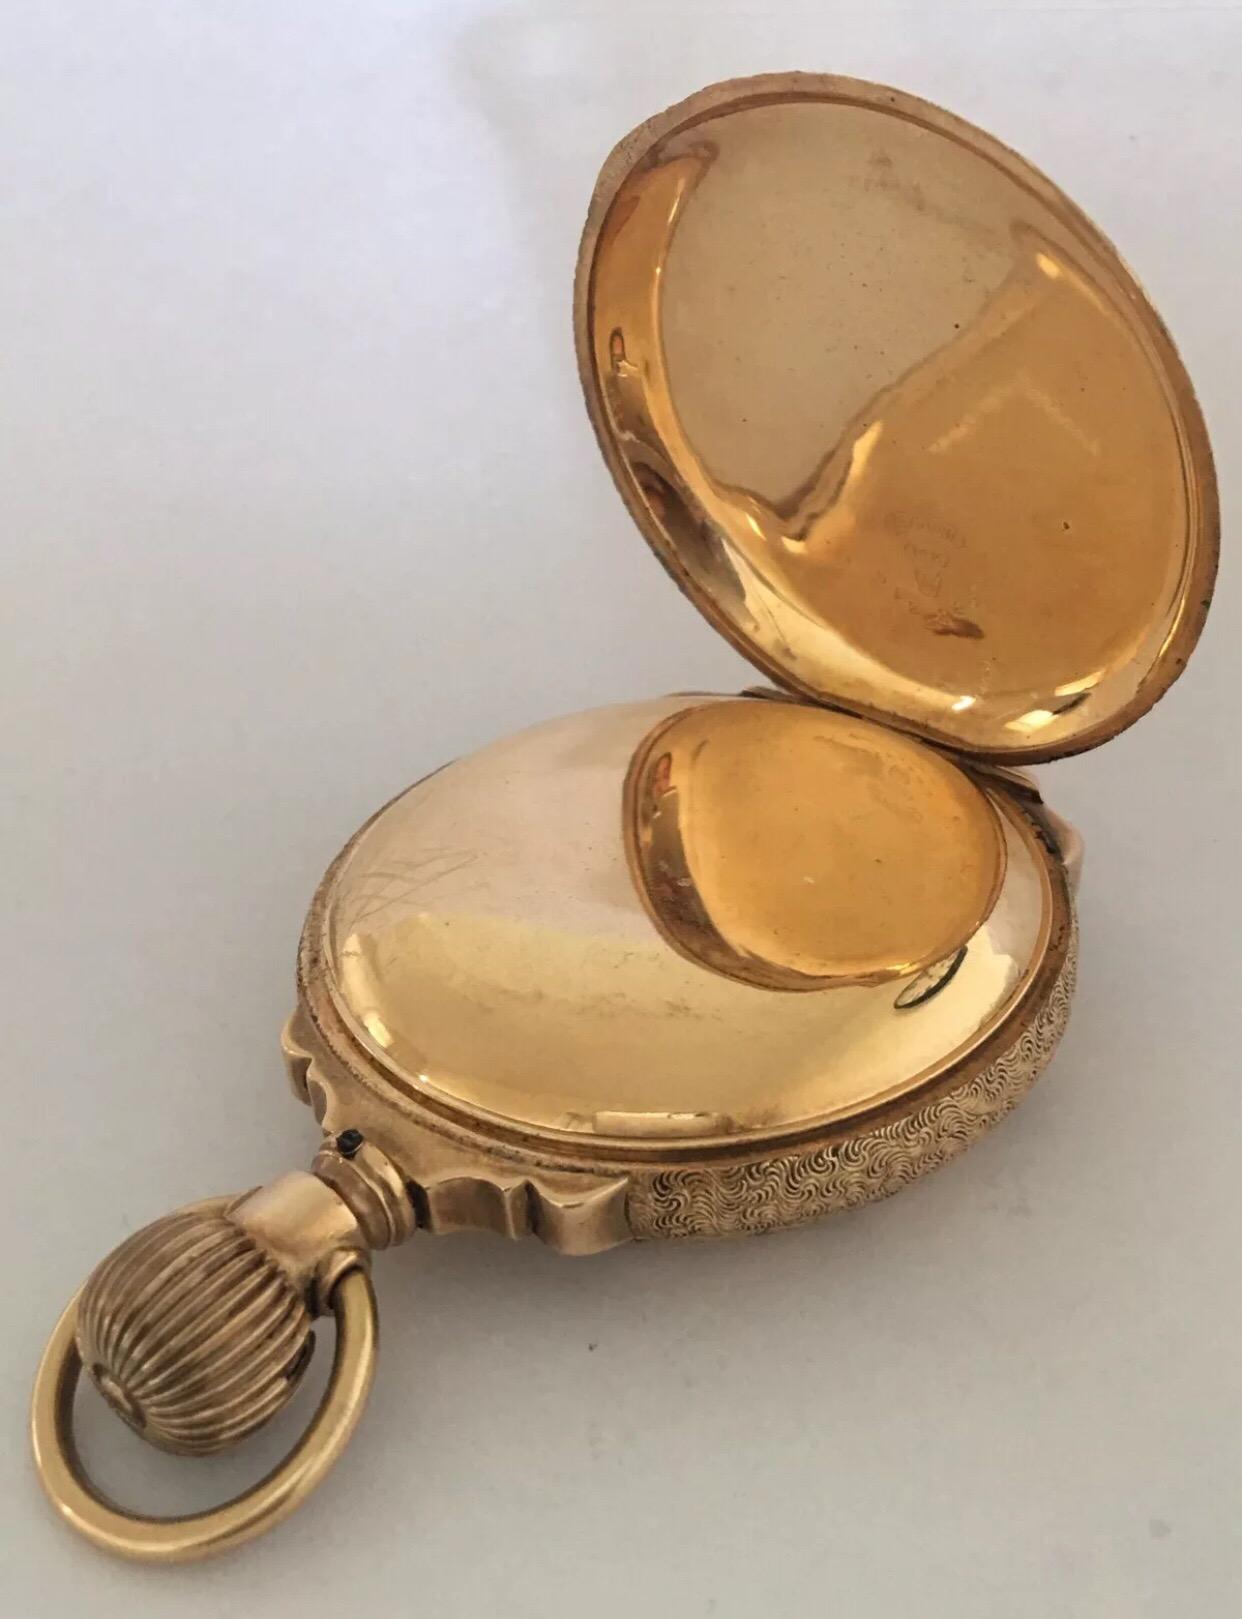 Heavy 14 Karat Gold Full Engraved Full Hunter Case Elgin Antique Pocket Watch In Good Condition For Sale In Carlisle, GB